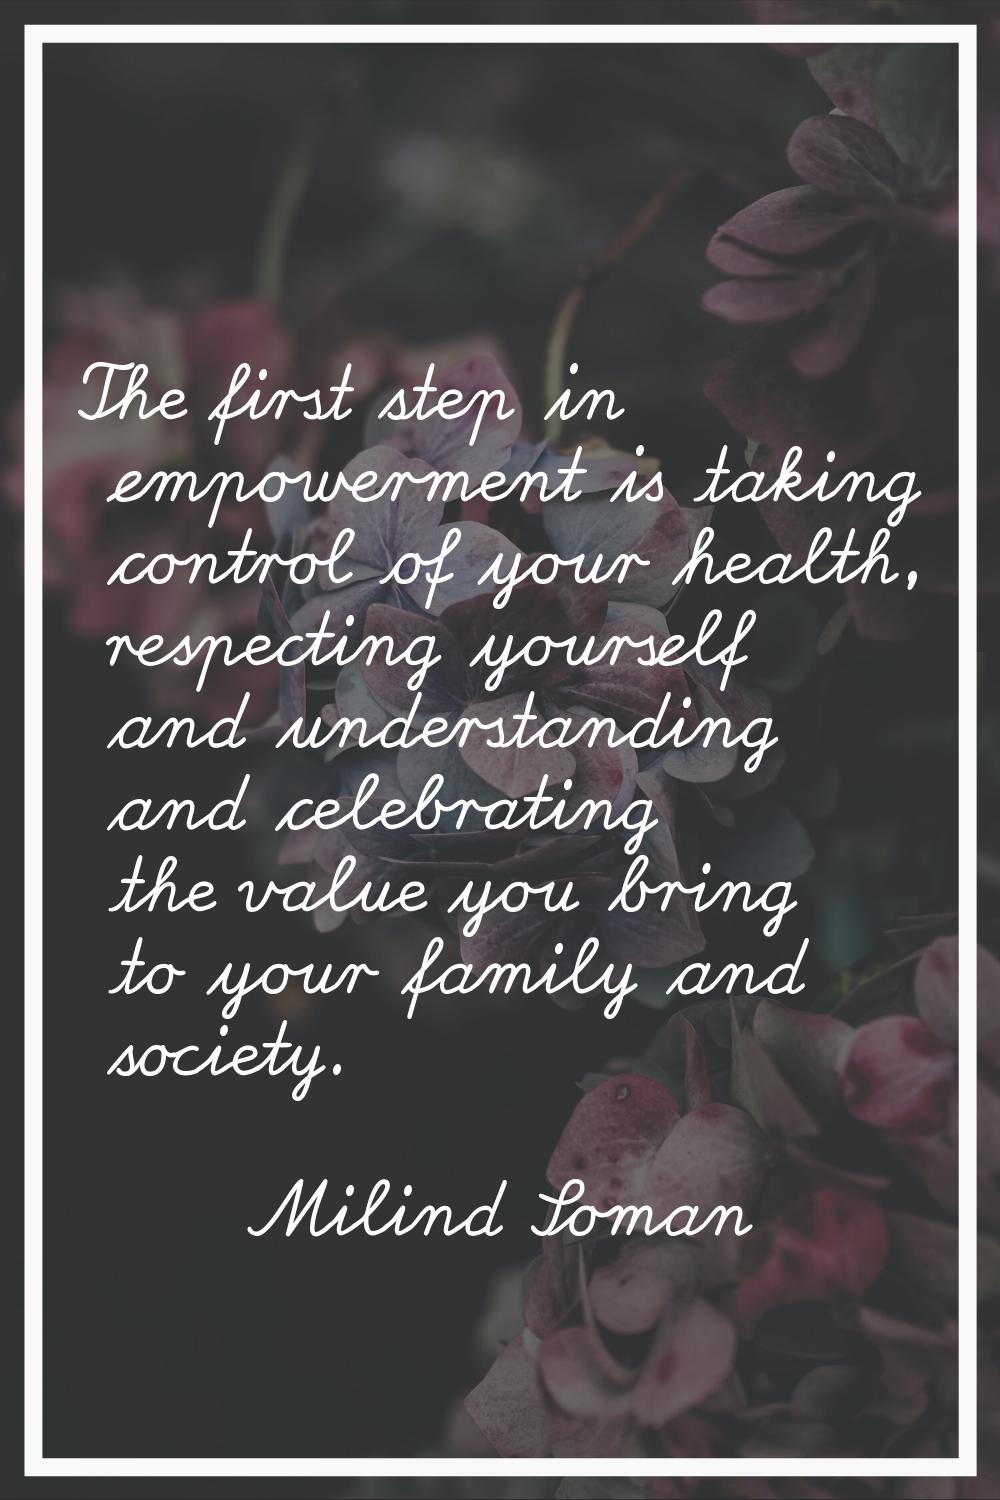 The first step in empowerment is taking control of your health, respecting yourself and understandi